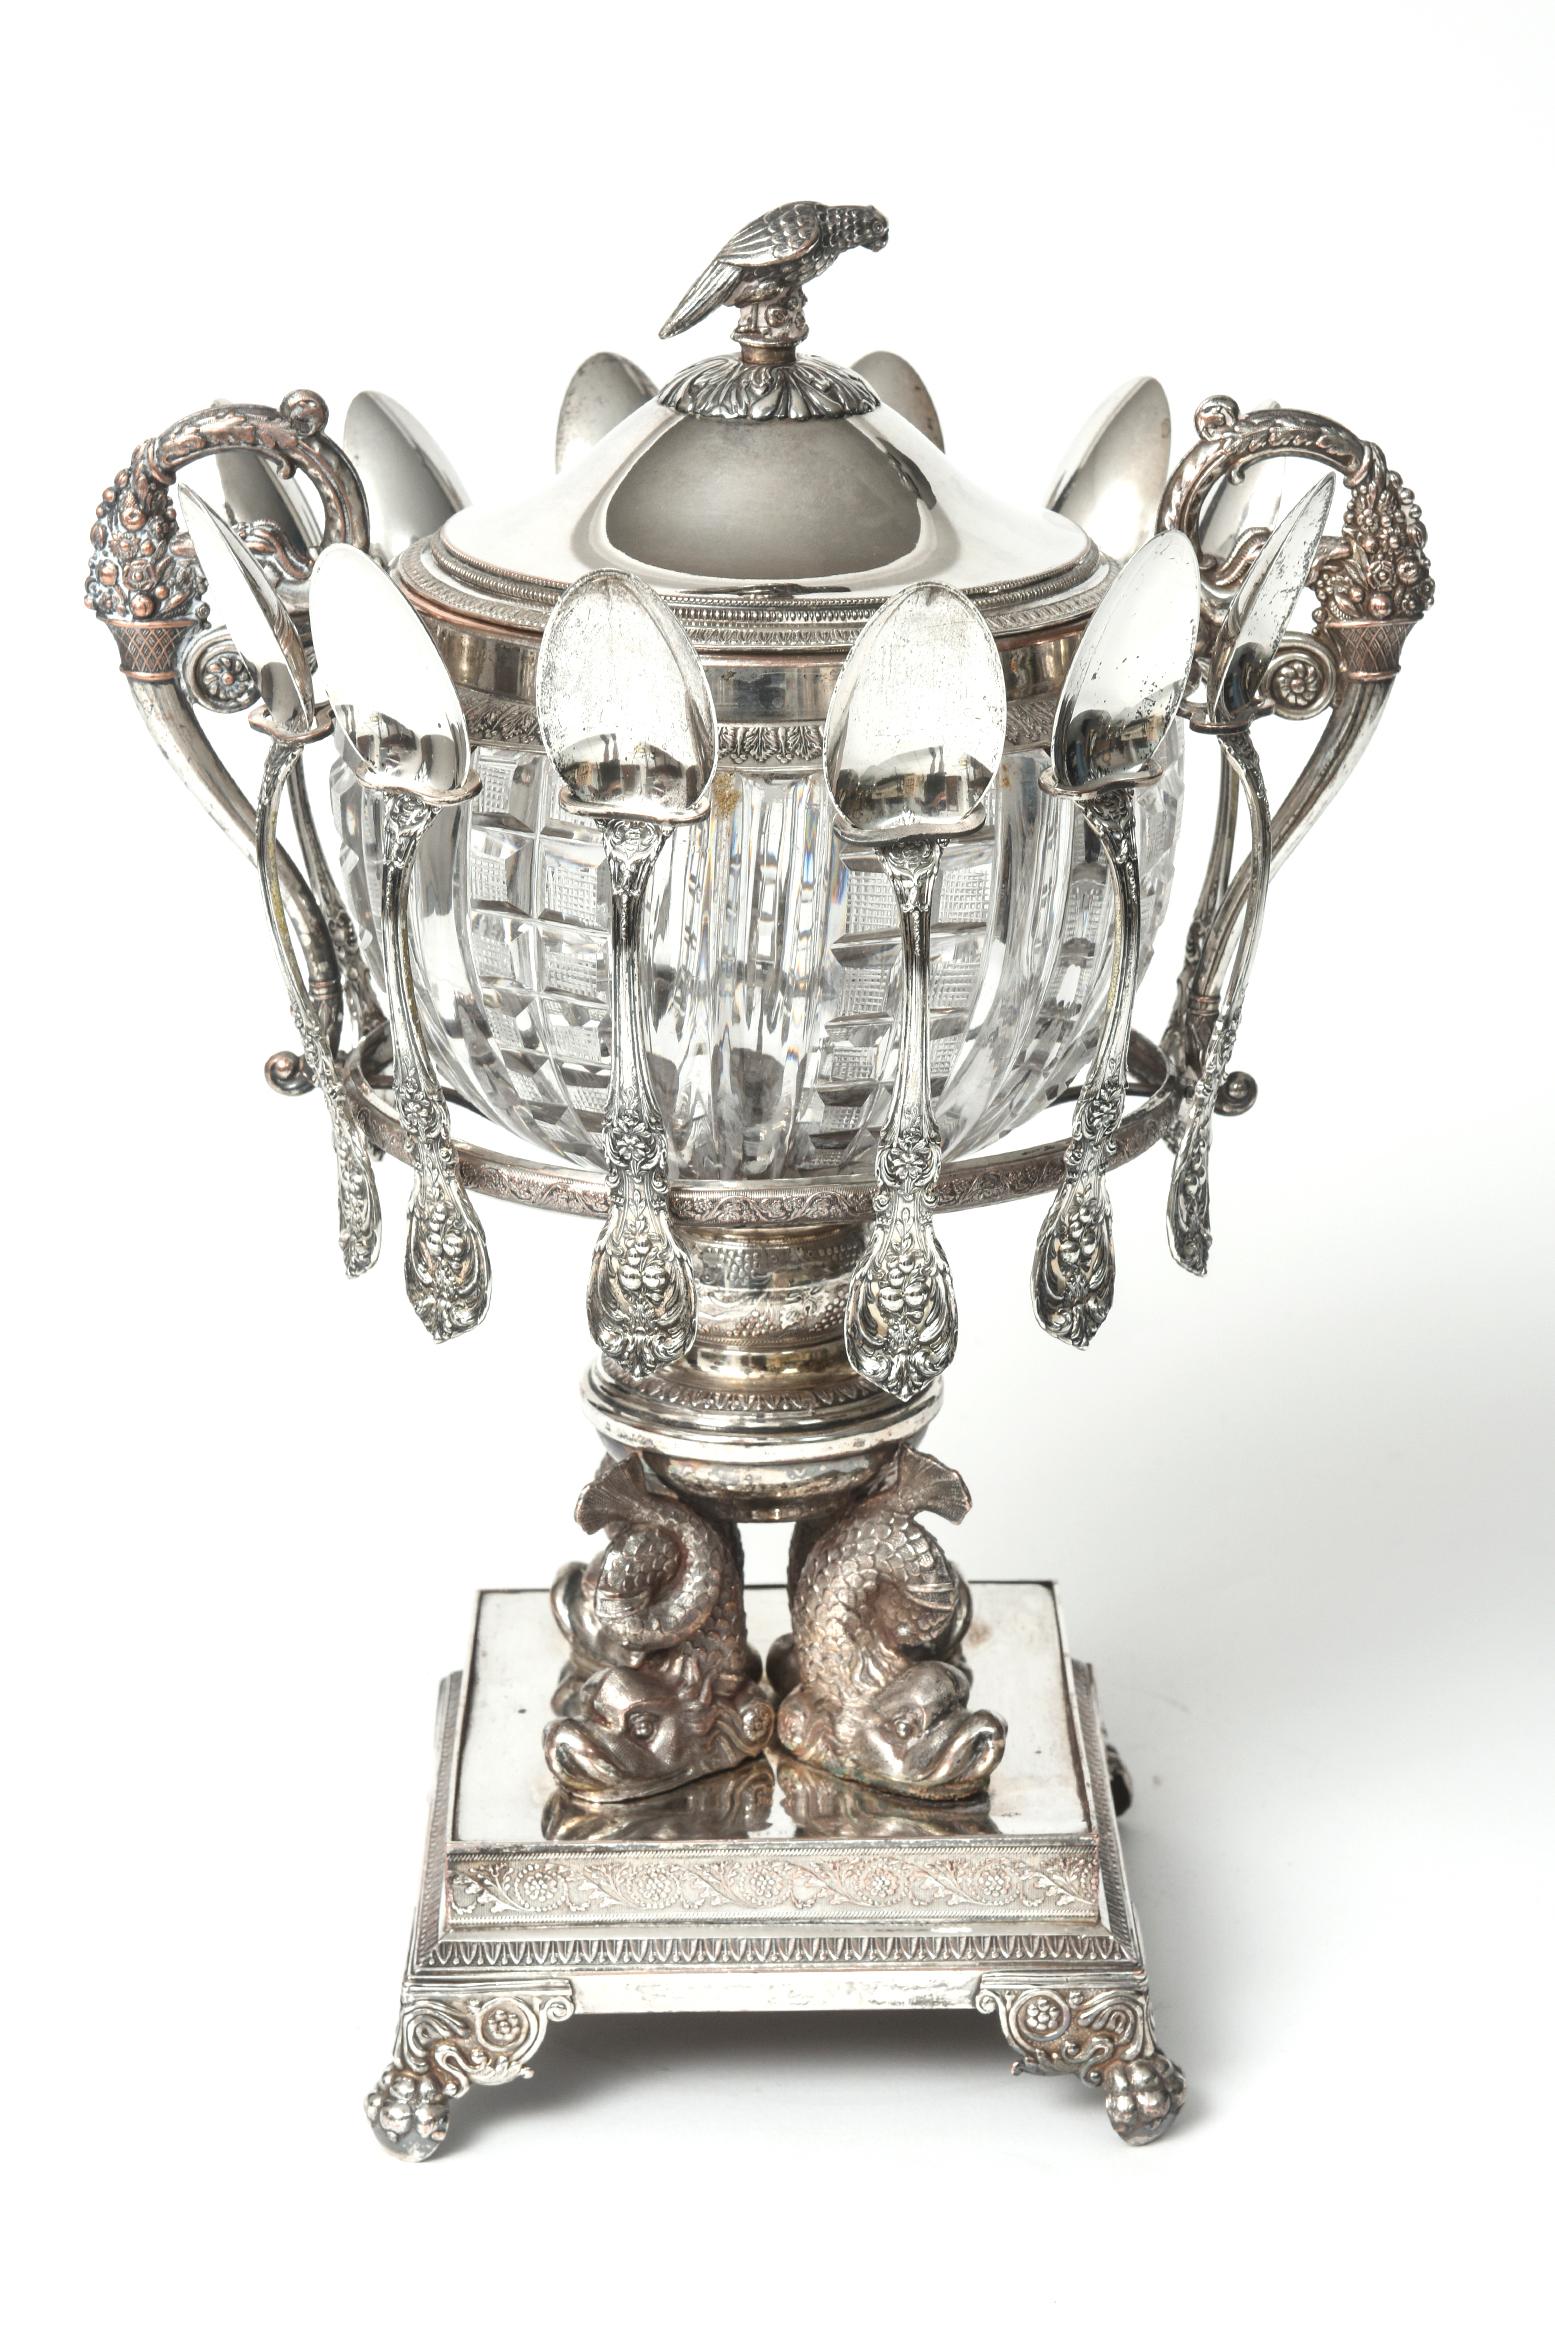 Incredible antique 19th century silver-plate covered caviar server with 12 sterling silver spoons. The lid has a parrot on fruit finial. Along the rims is a beaded and leaf design. The caviar is held in a cut crystal bowl. On the outside of the bowl